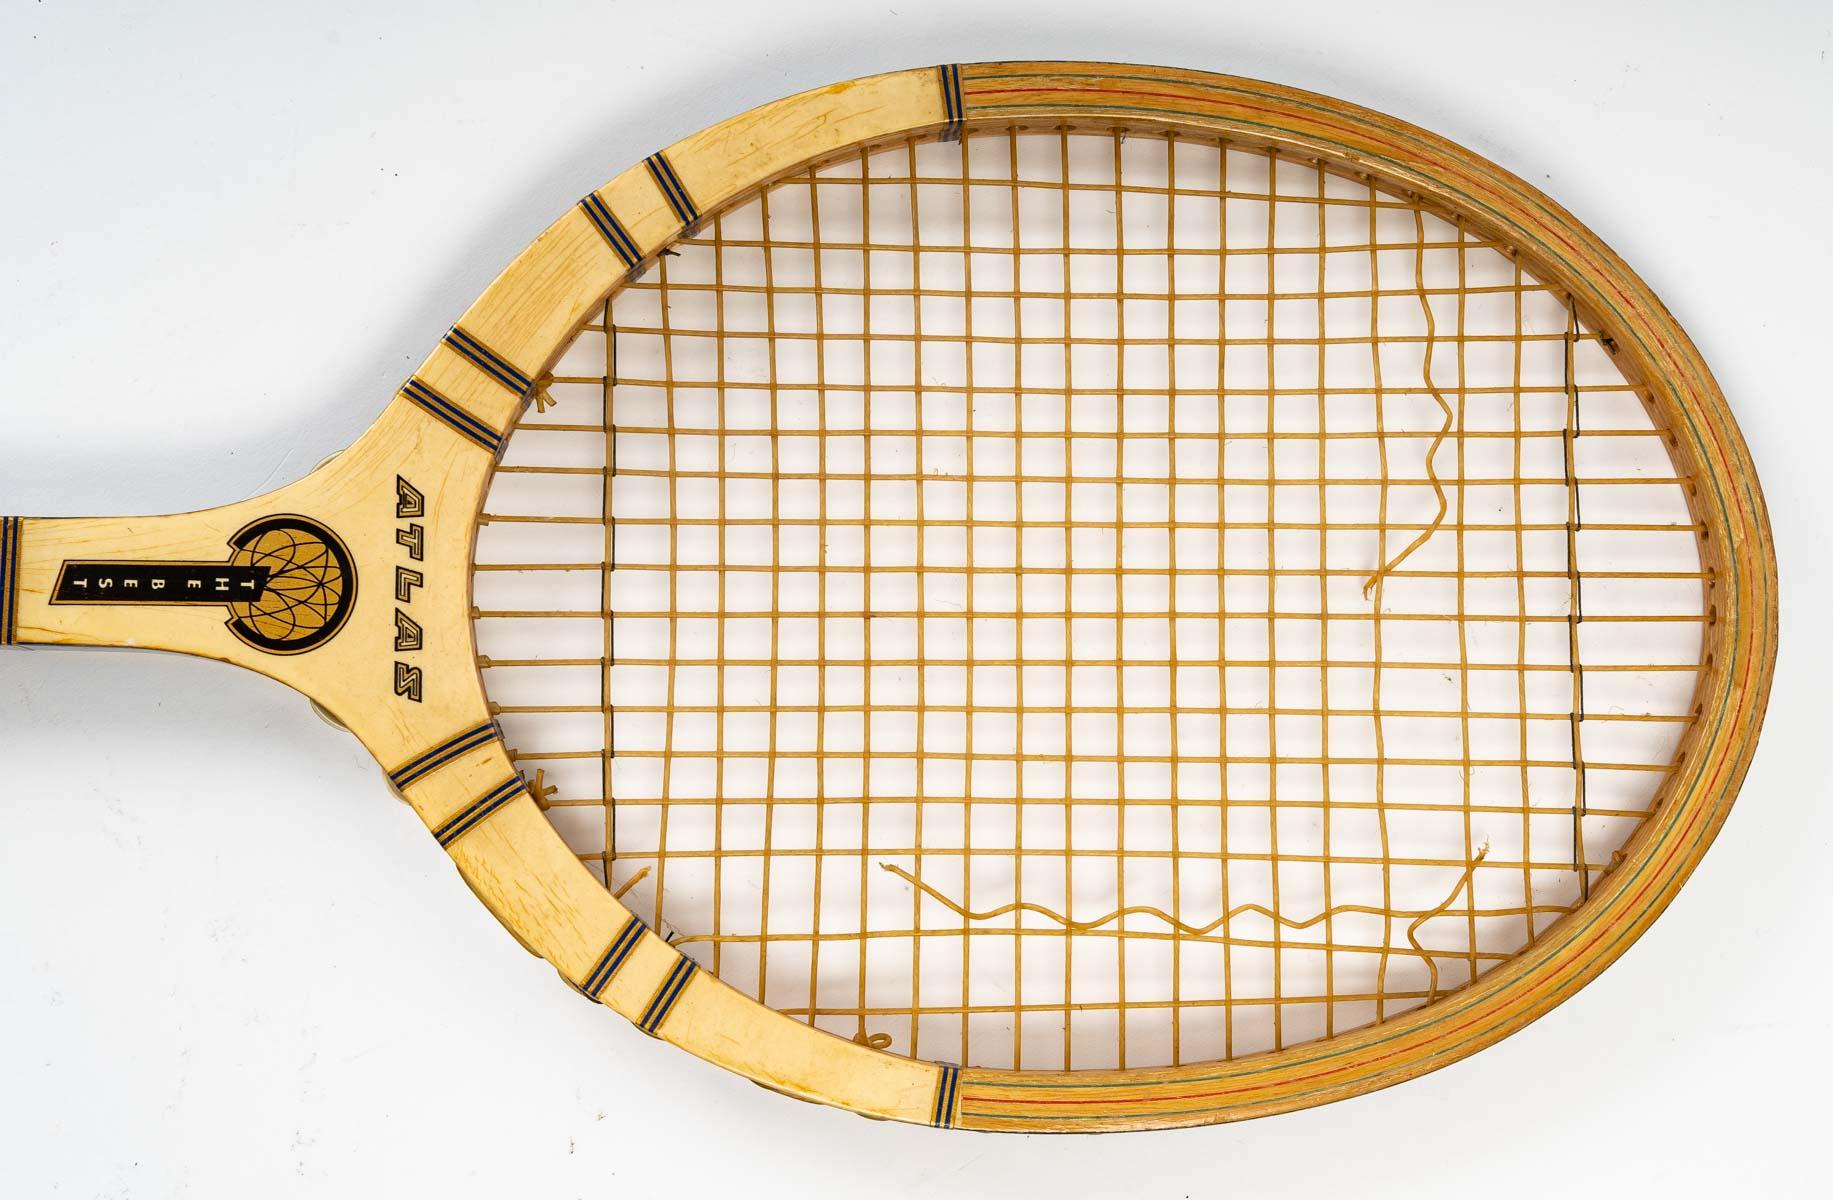 Atlas Tennis Racket, for Championship Play For Sale 3